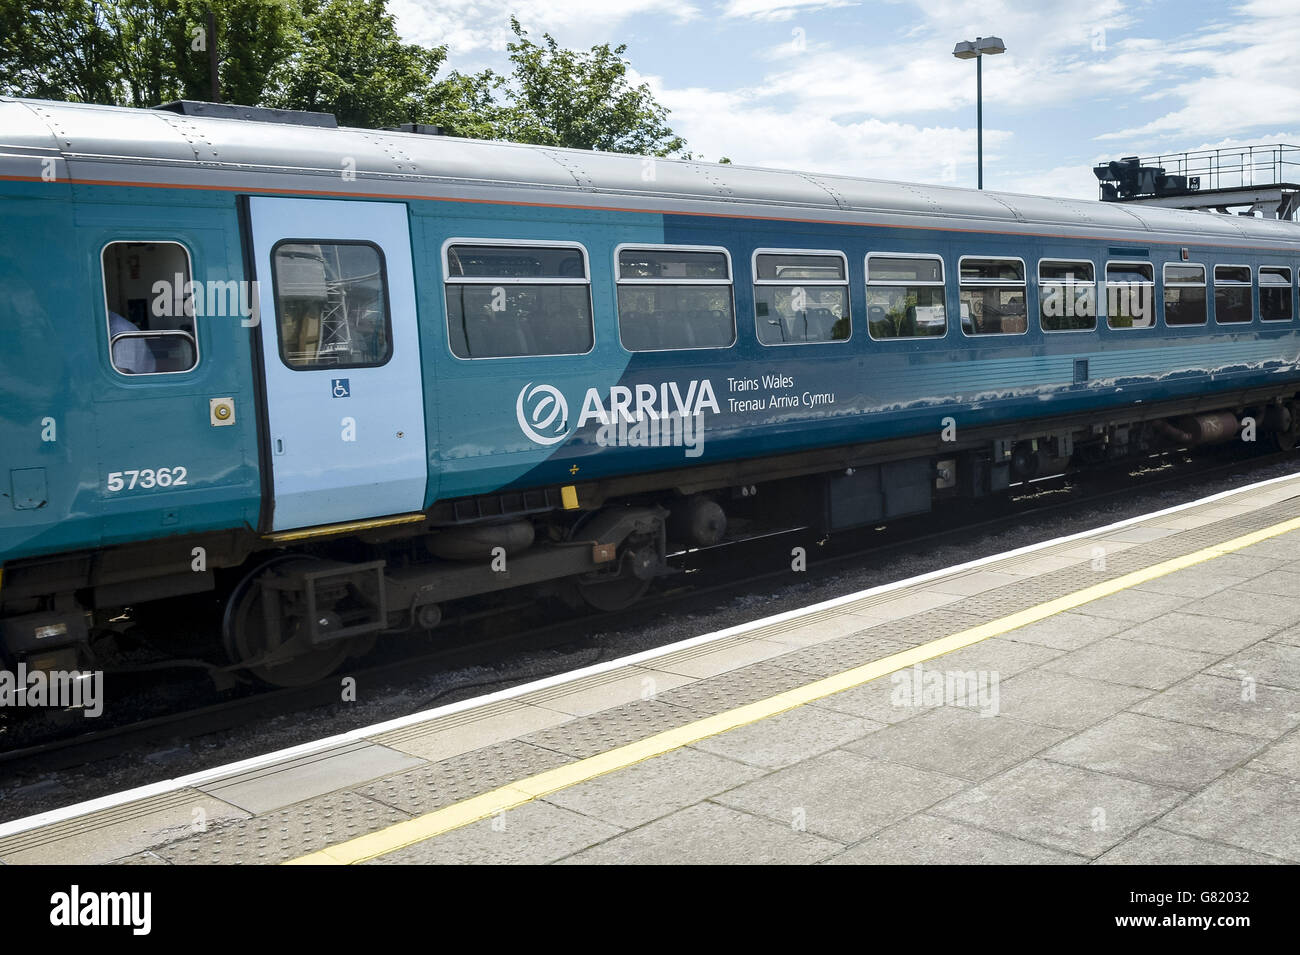 Railway stock. ARRIVA train in Cardiff Central station. Stock Photo